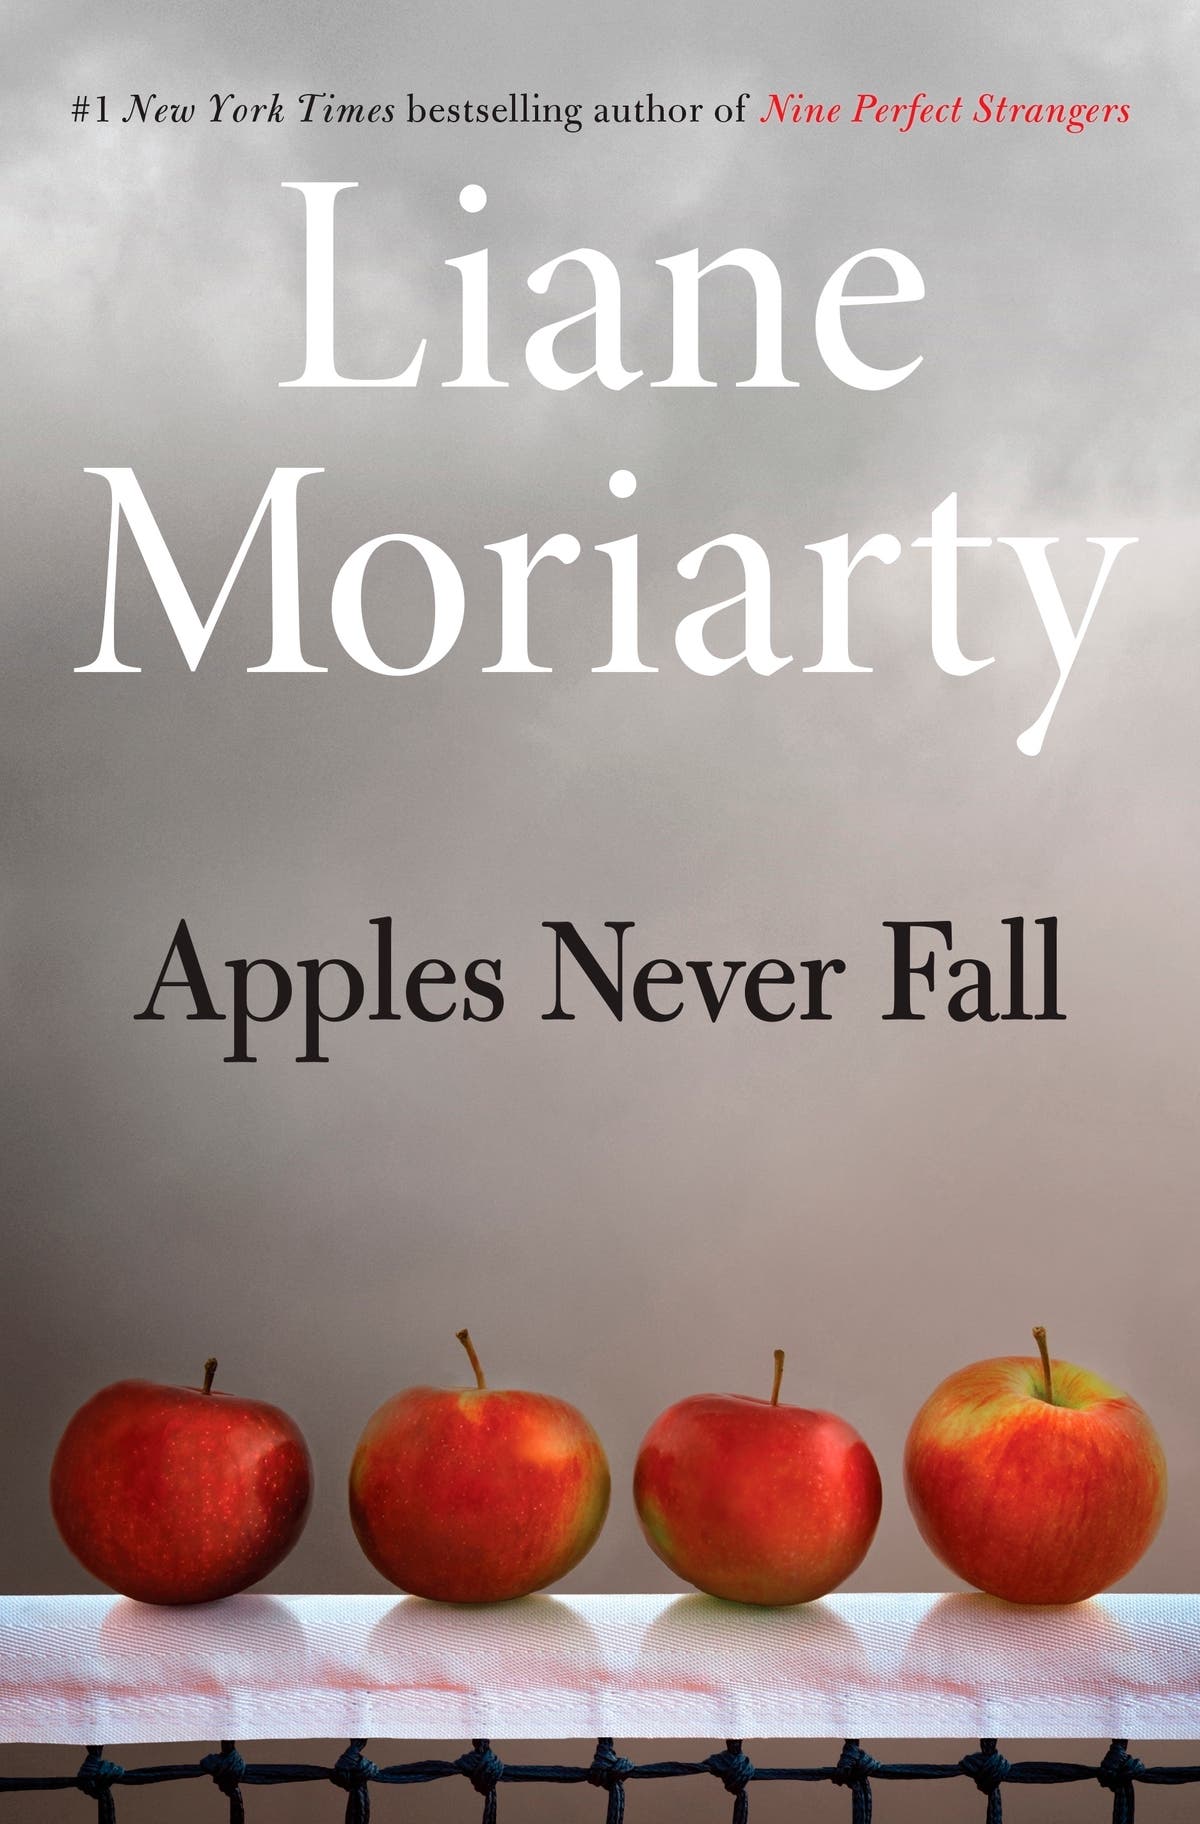 Anmeldelse: Liane Moriarty hits an ace with 'Apples Never Fall'